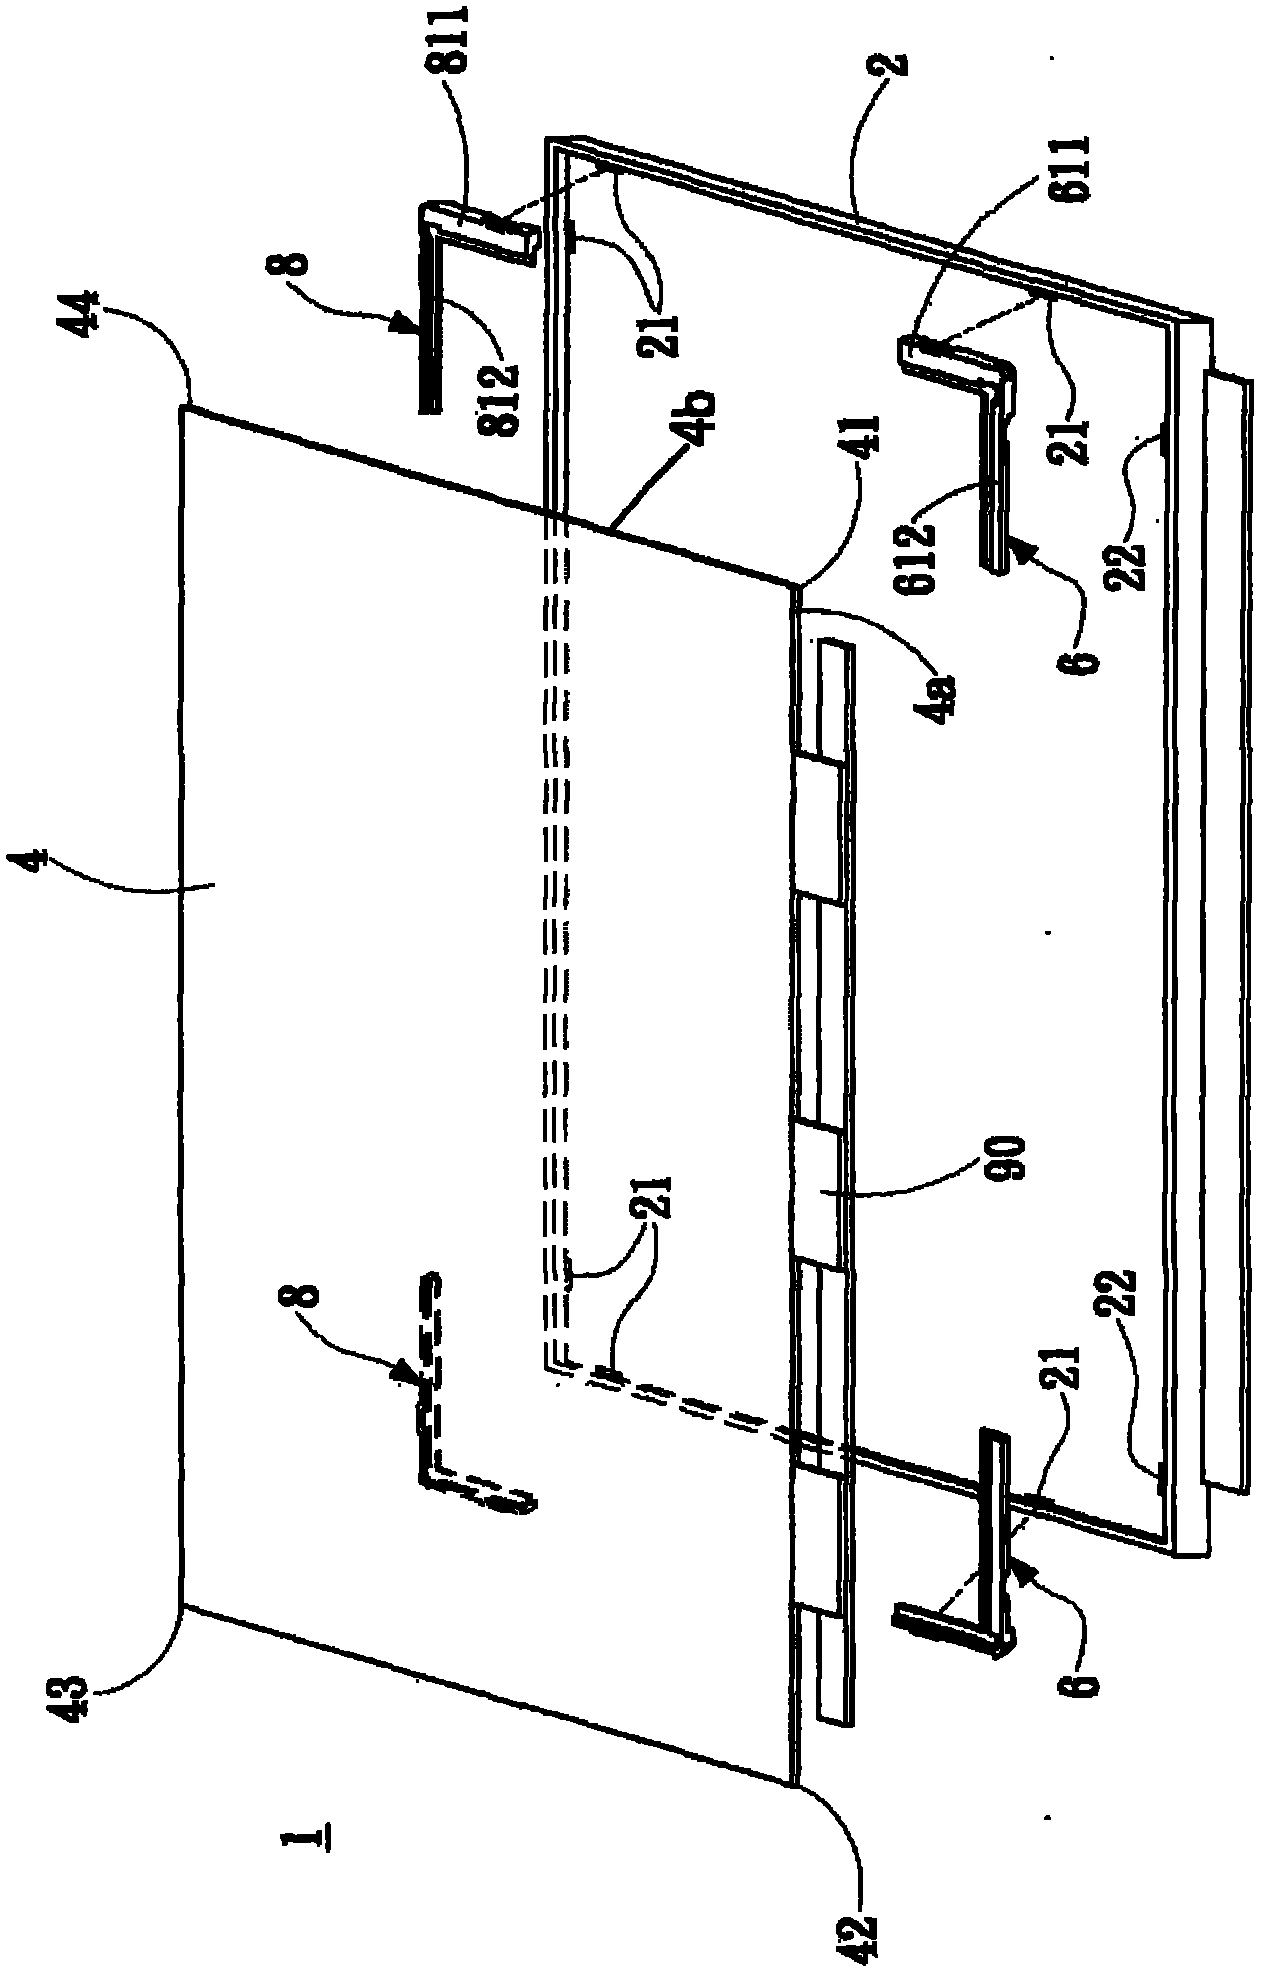 Backlight module and rubber frame structure thereof